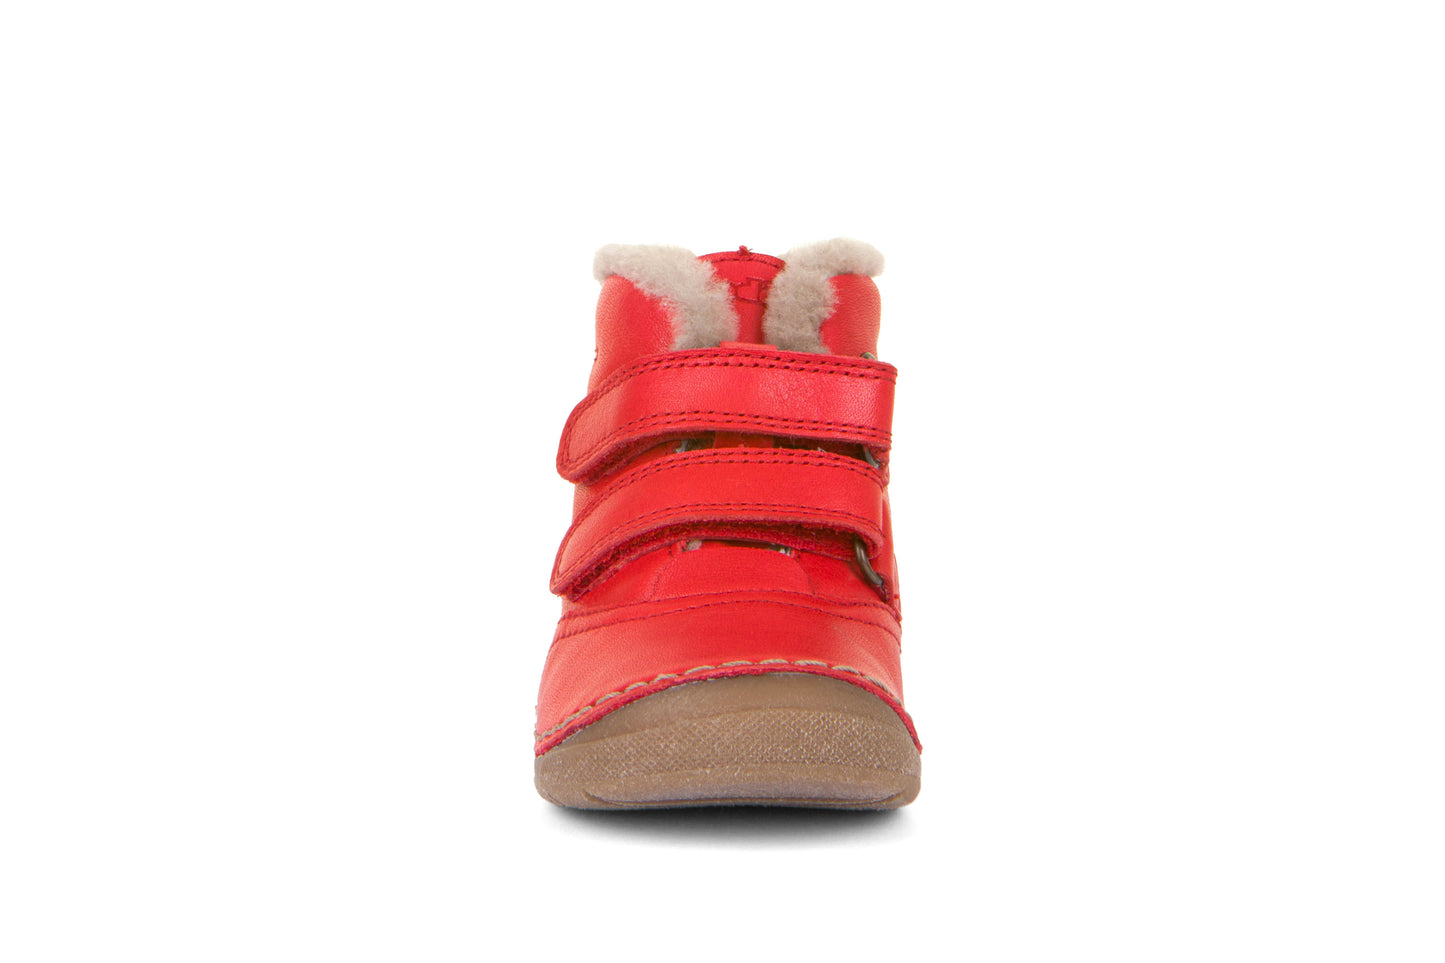 A unisex sheepskin lined boot by Froddo, style Paix Winter G2110113-11 in Red. Front view.